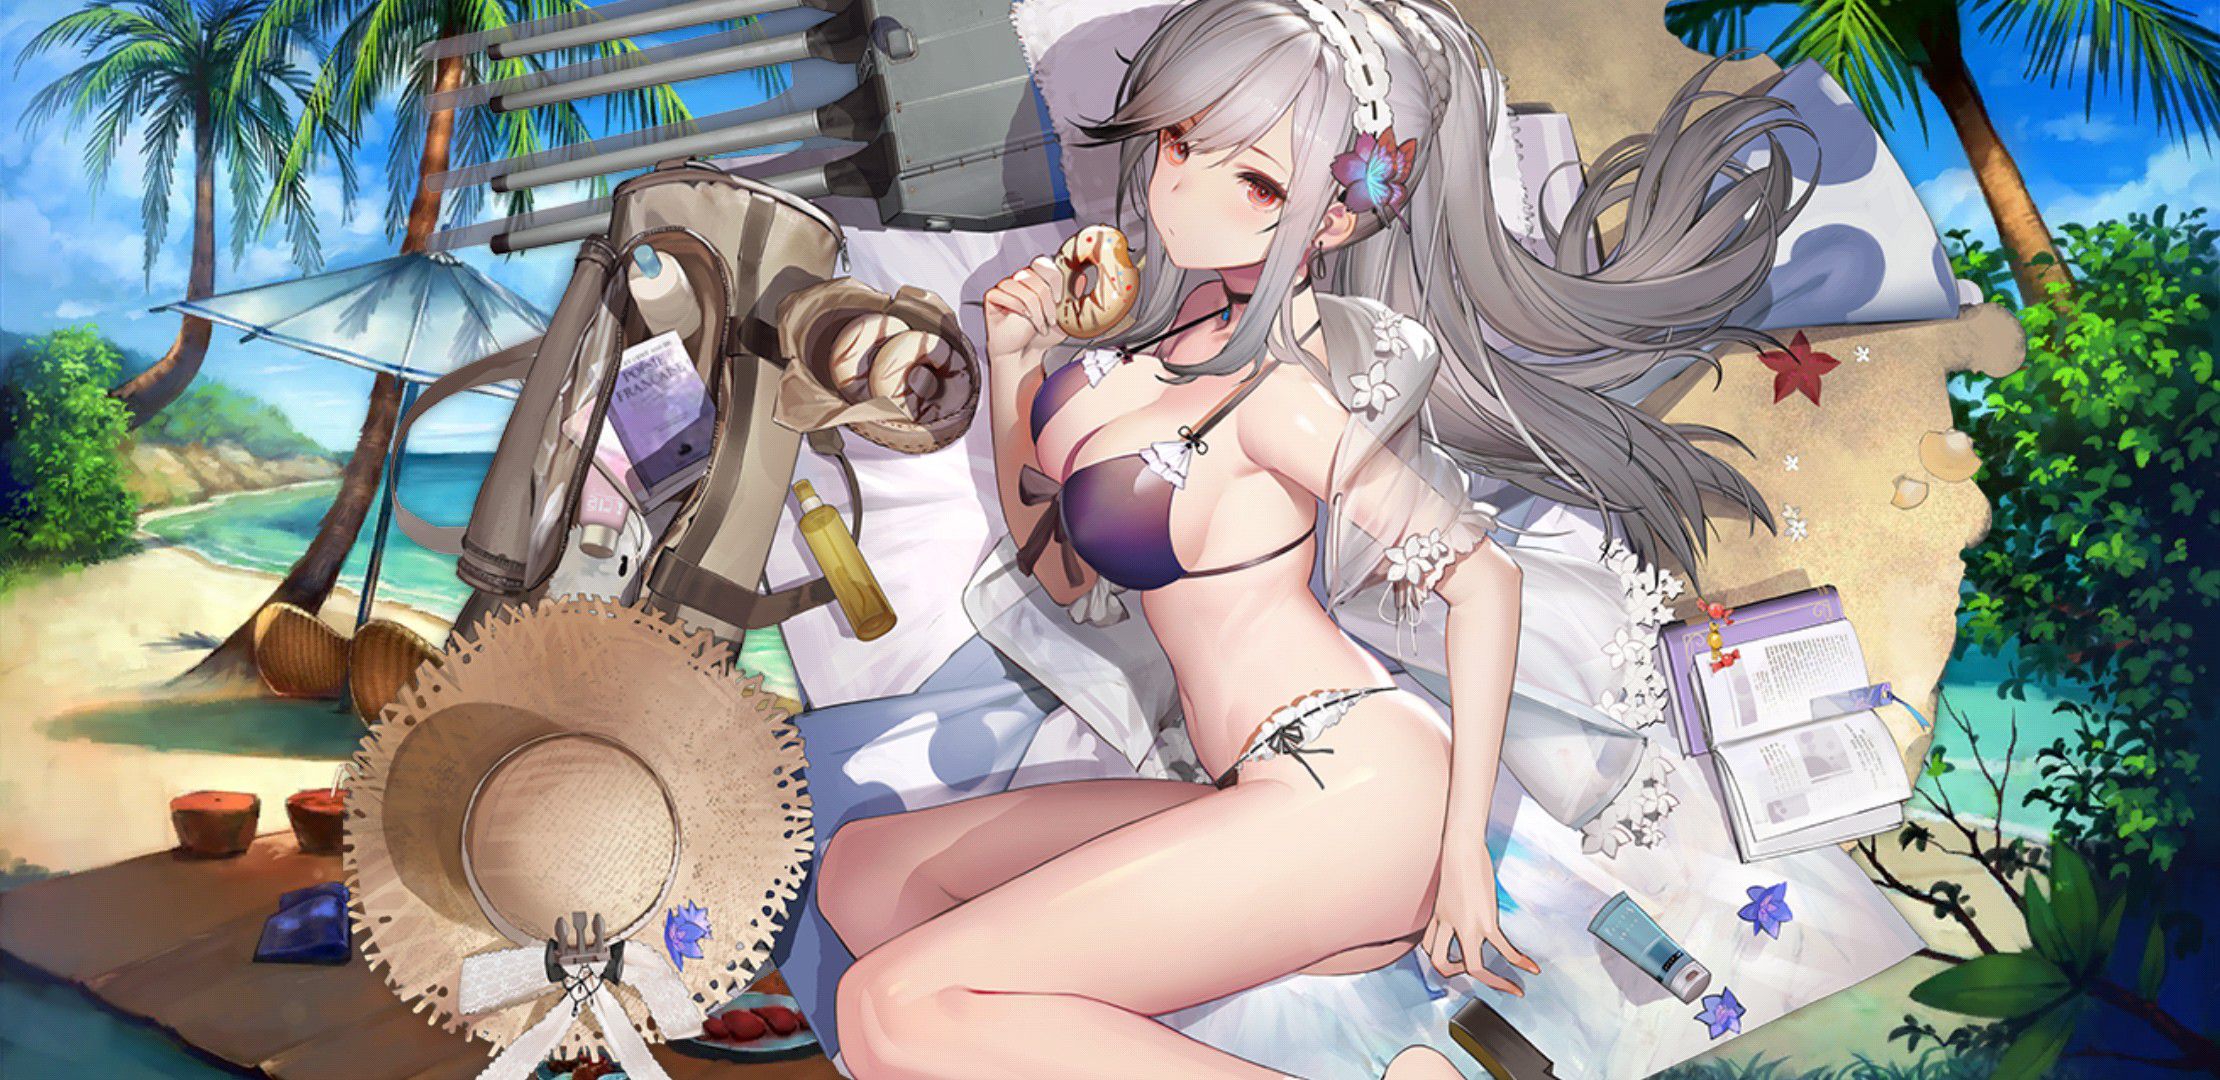 【There is an image】 Smartphone that urges charging with erotic swimsuits is malicious 43